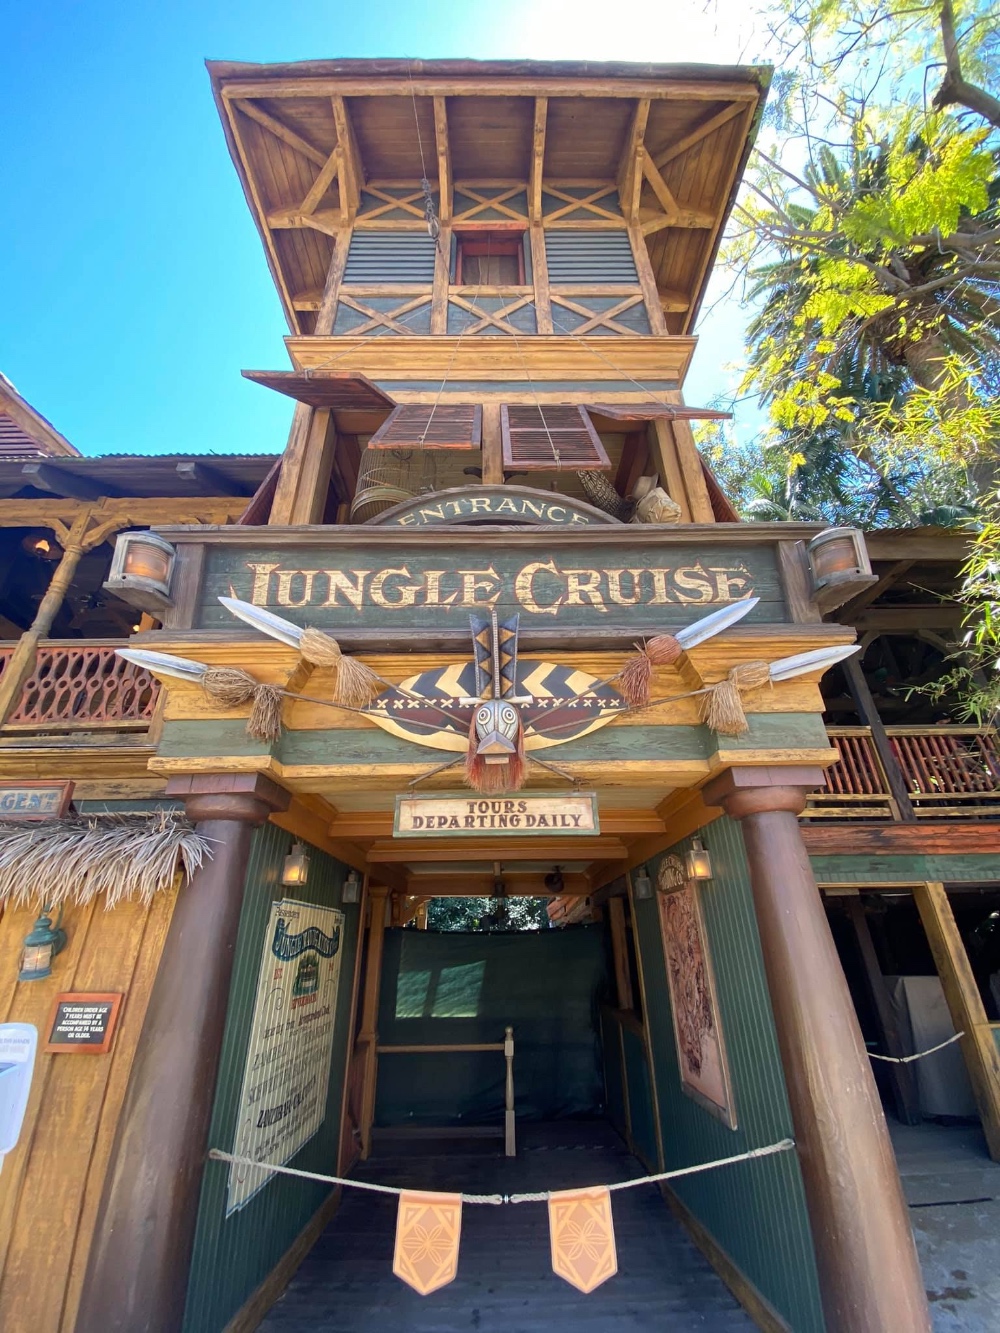 New Jungle Cruise Experience Opens July 16th At Disneyland New Experience Details Revealed The Go To Family